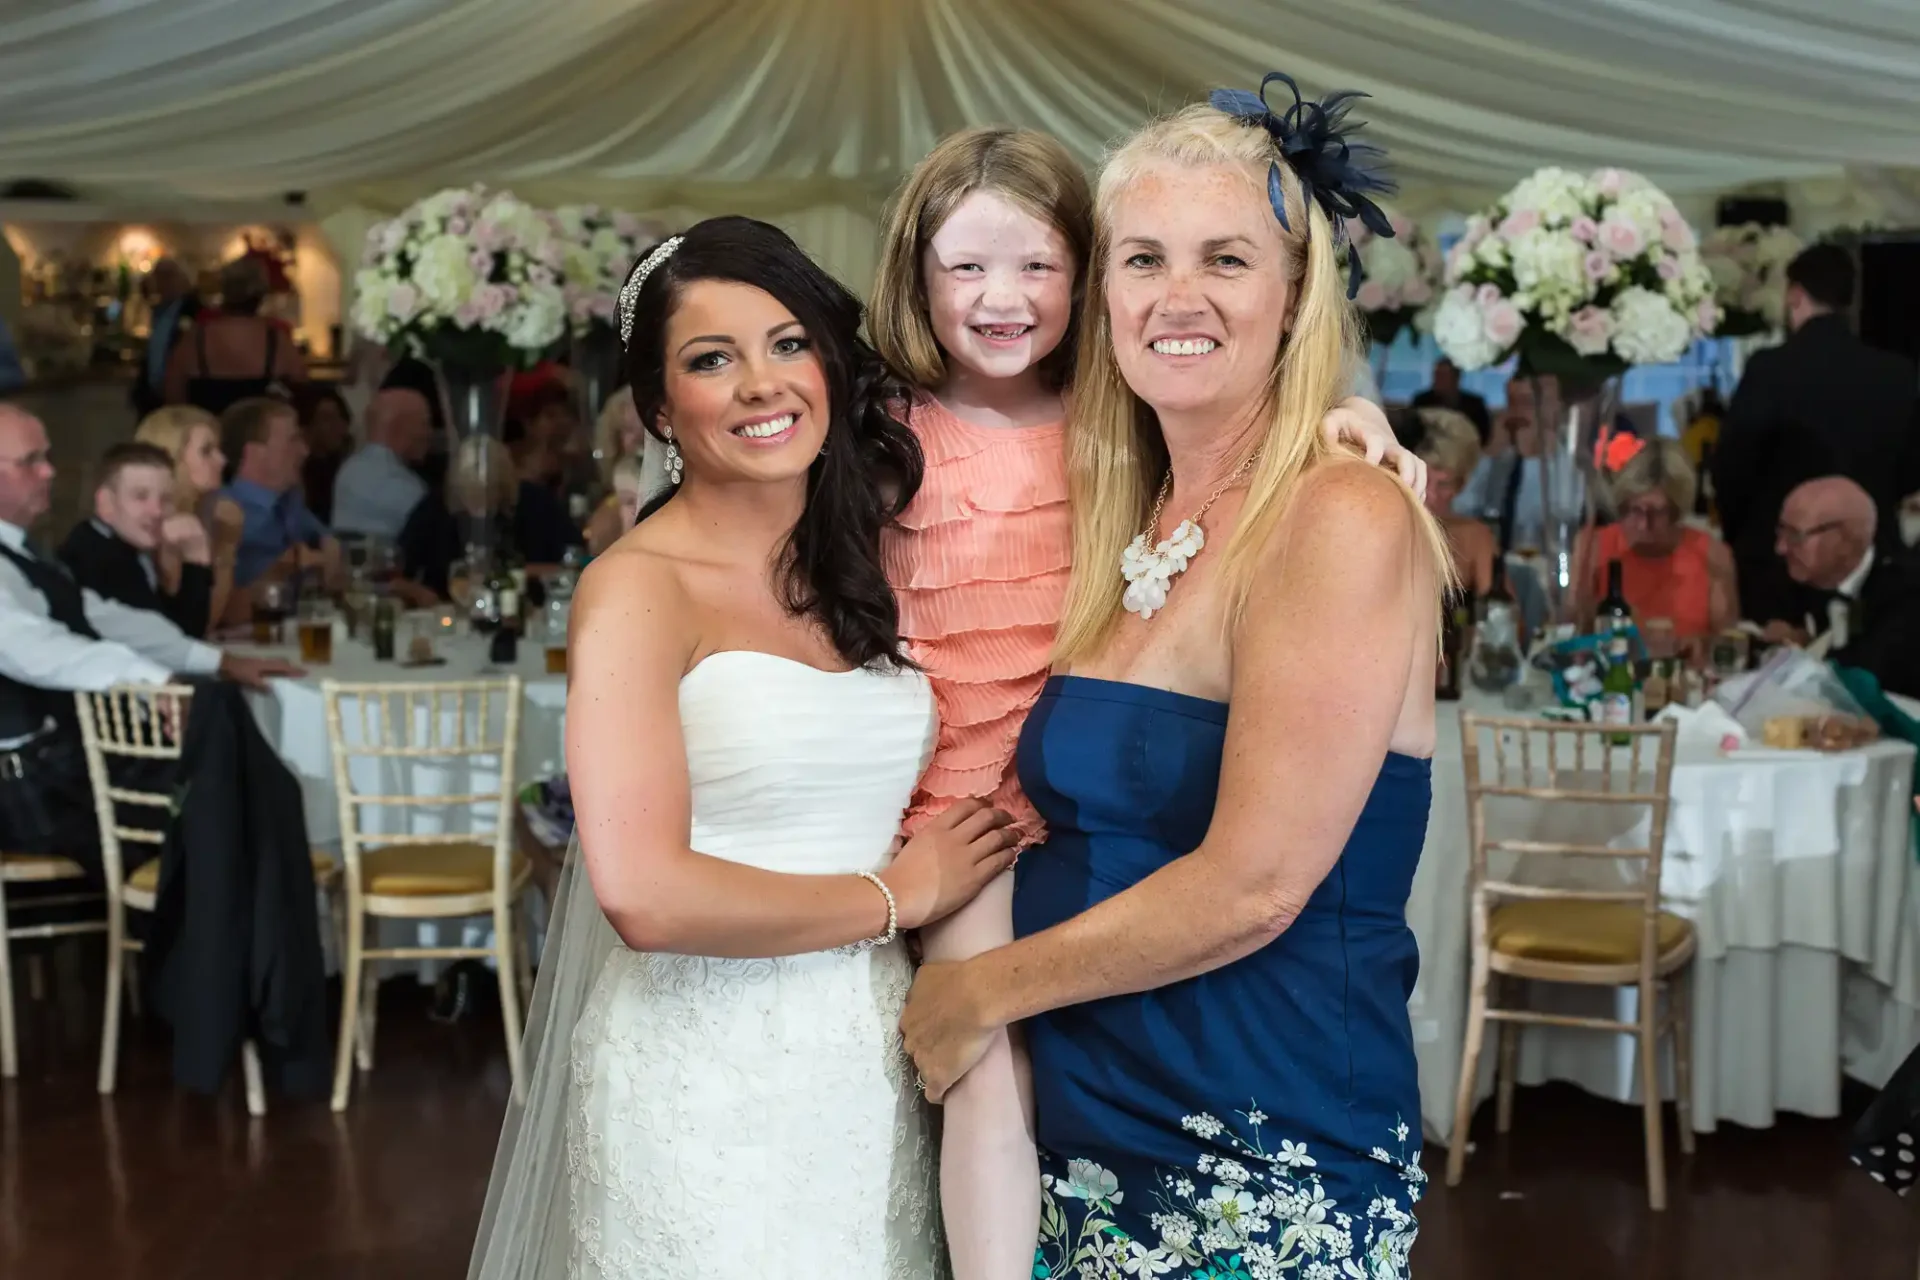 Three generations of women, a bride in white, a young girl, and an older woman in blue, smiling together at a wedding reception.